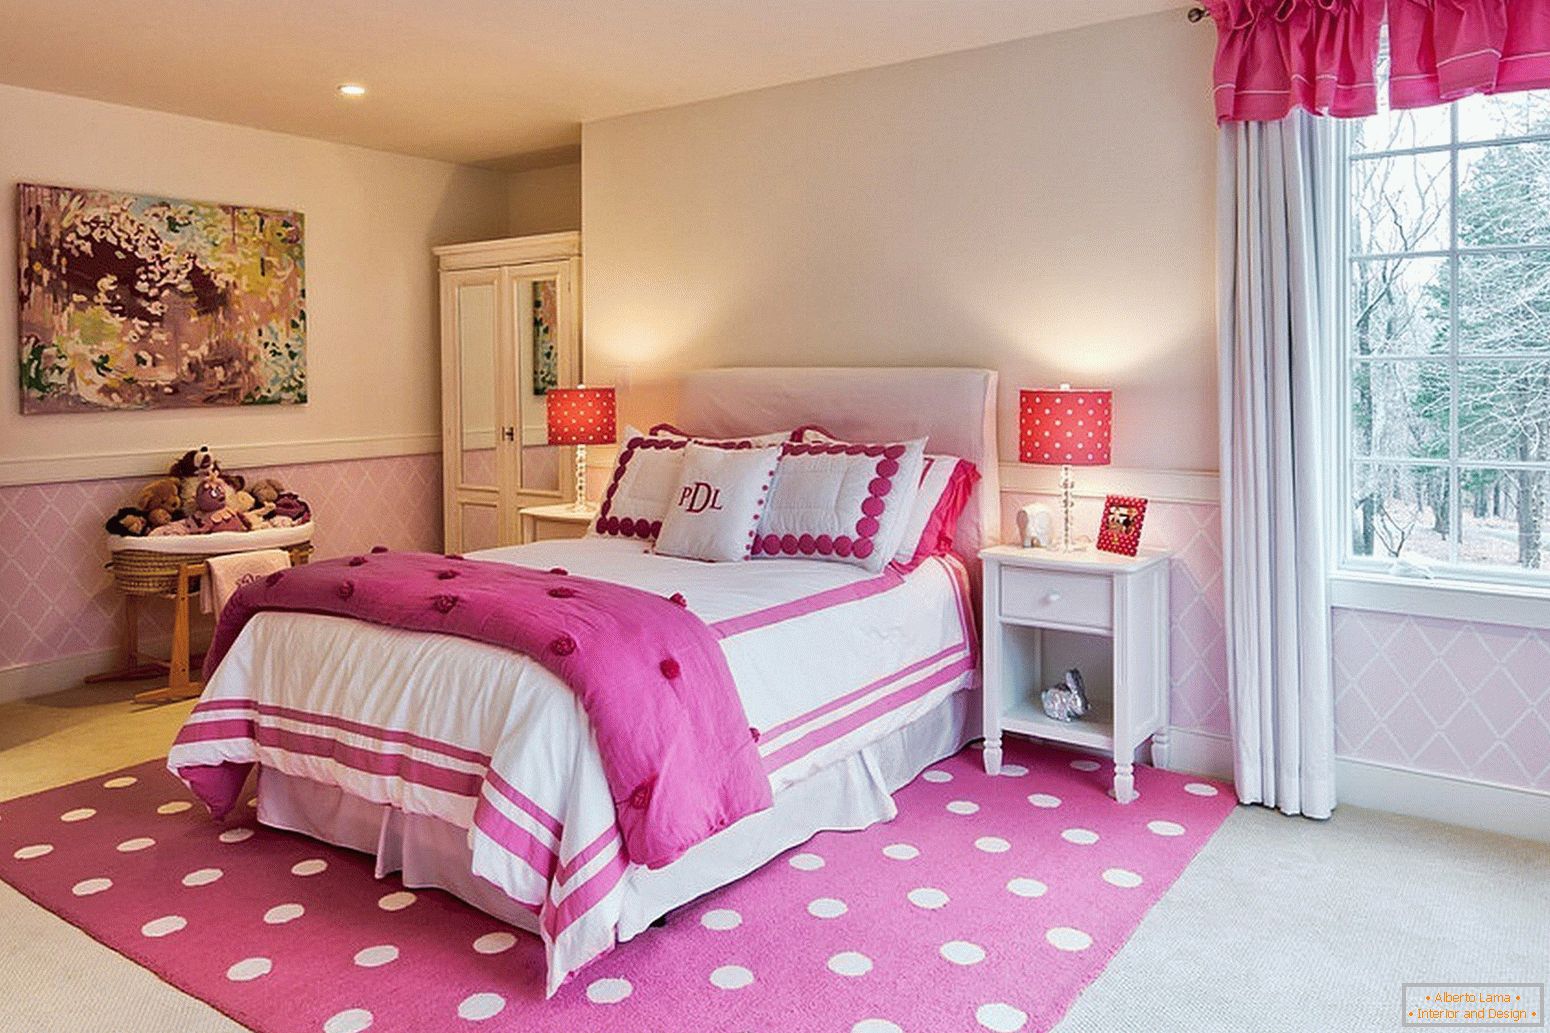 12 Years Old Bedroom Decorating Ideas